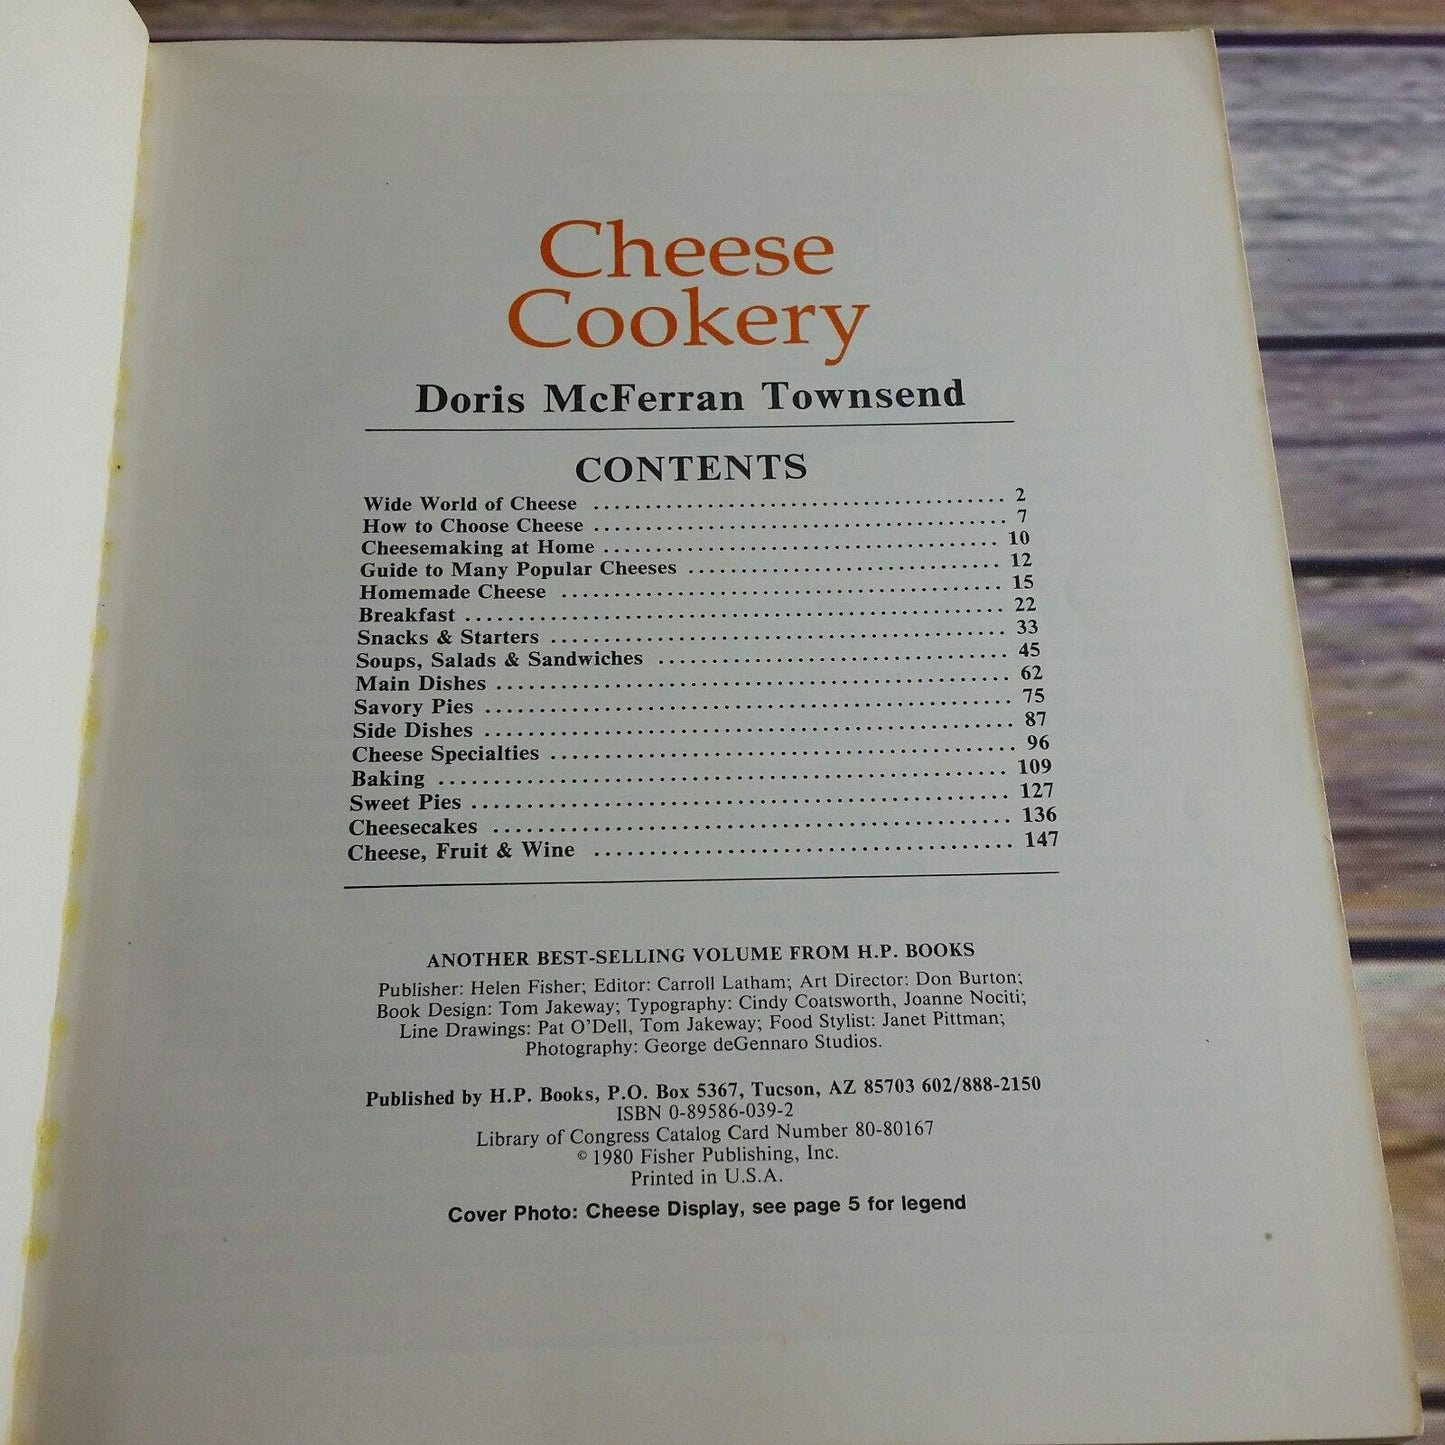 Vintage Cookbook Cheese Cookery Recipes 1980 Doris McFerran Townsend Paperback HP Books 1980s Cheesemaking Homemade Cheese Specialities